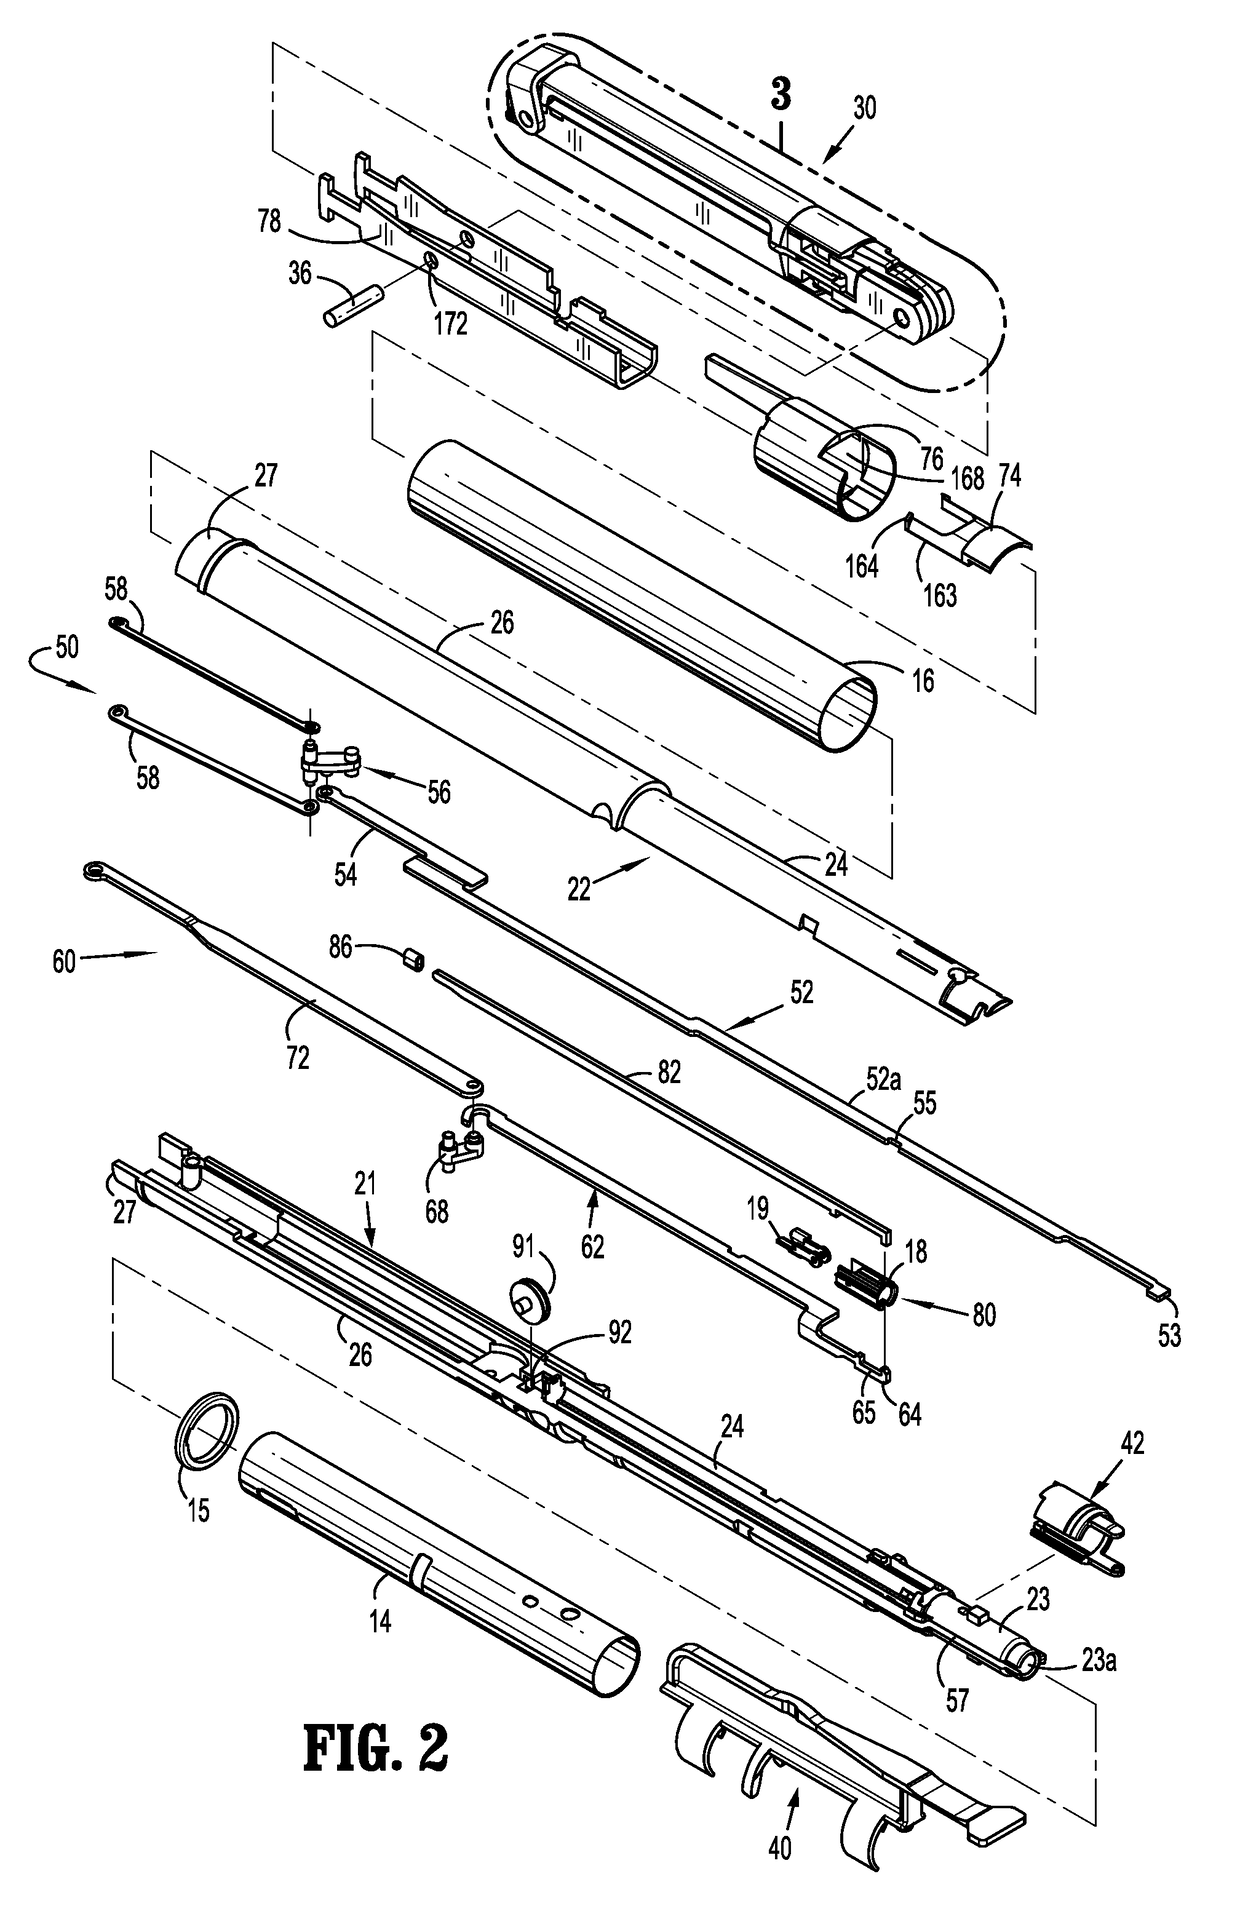 Surgical stapling loading unit having articulating jaws